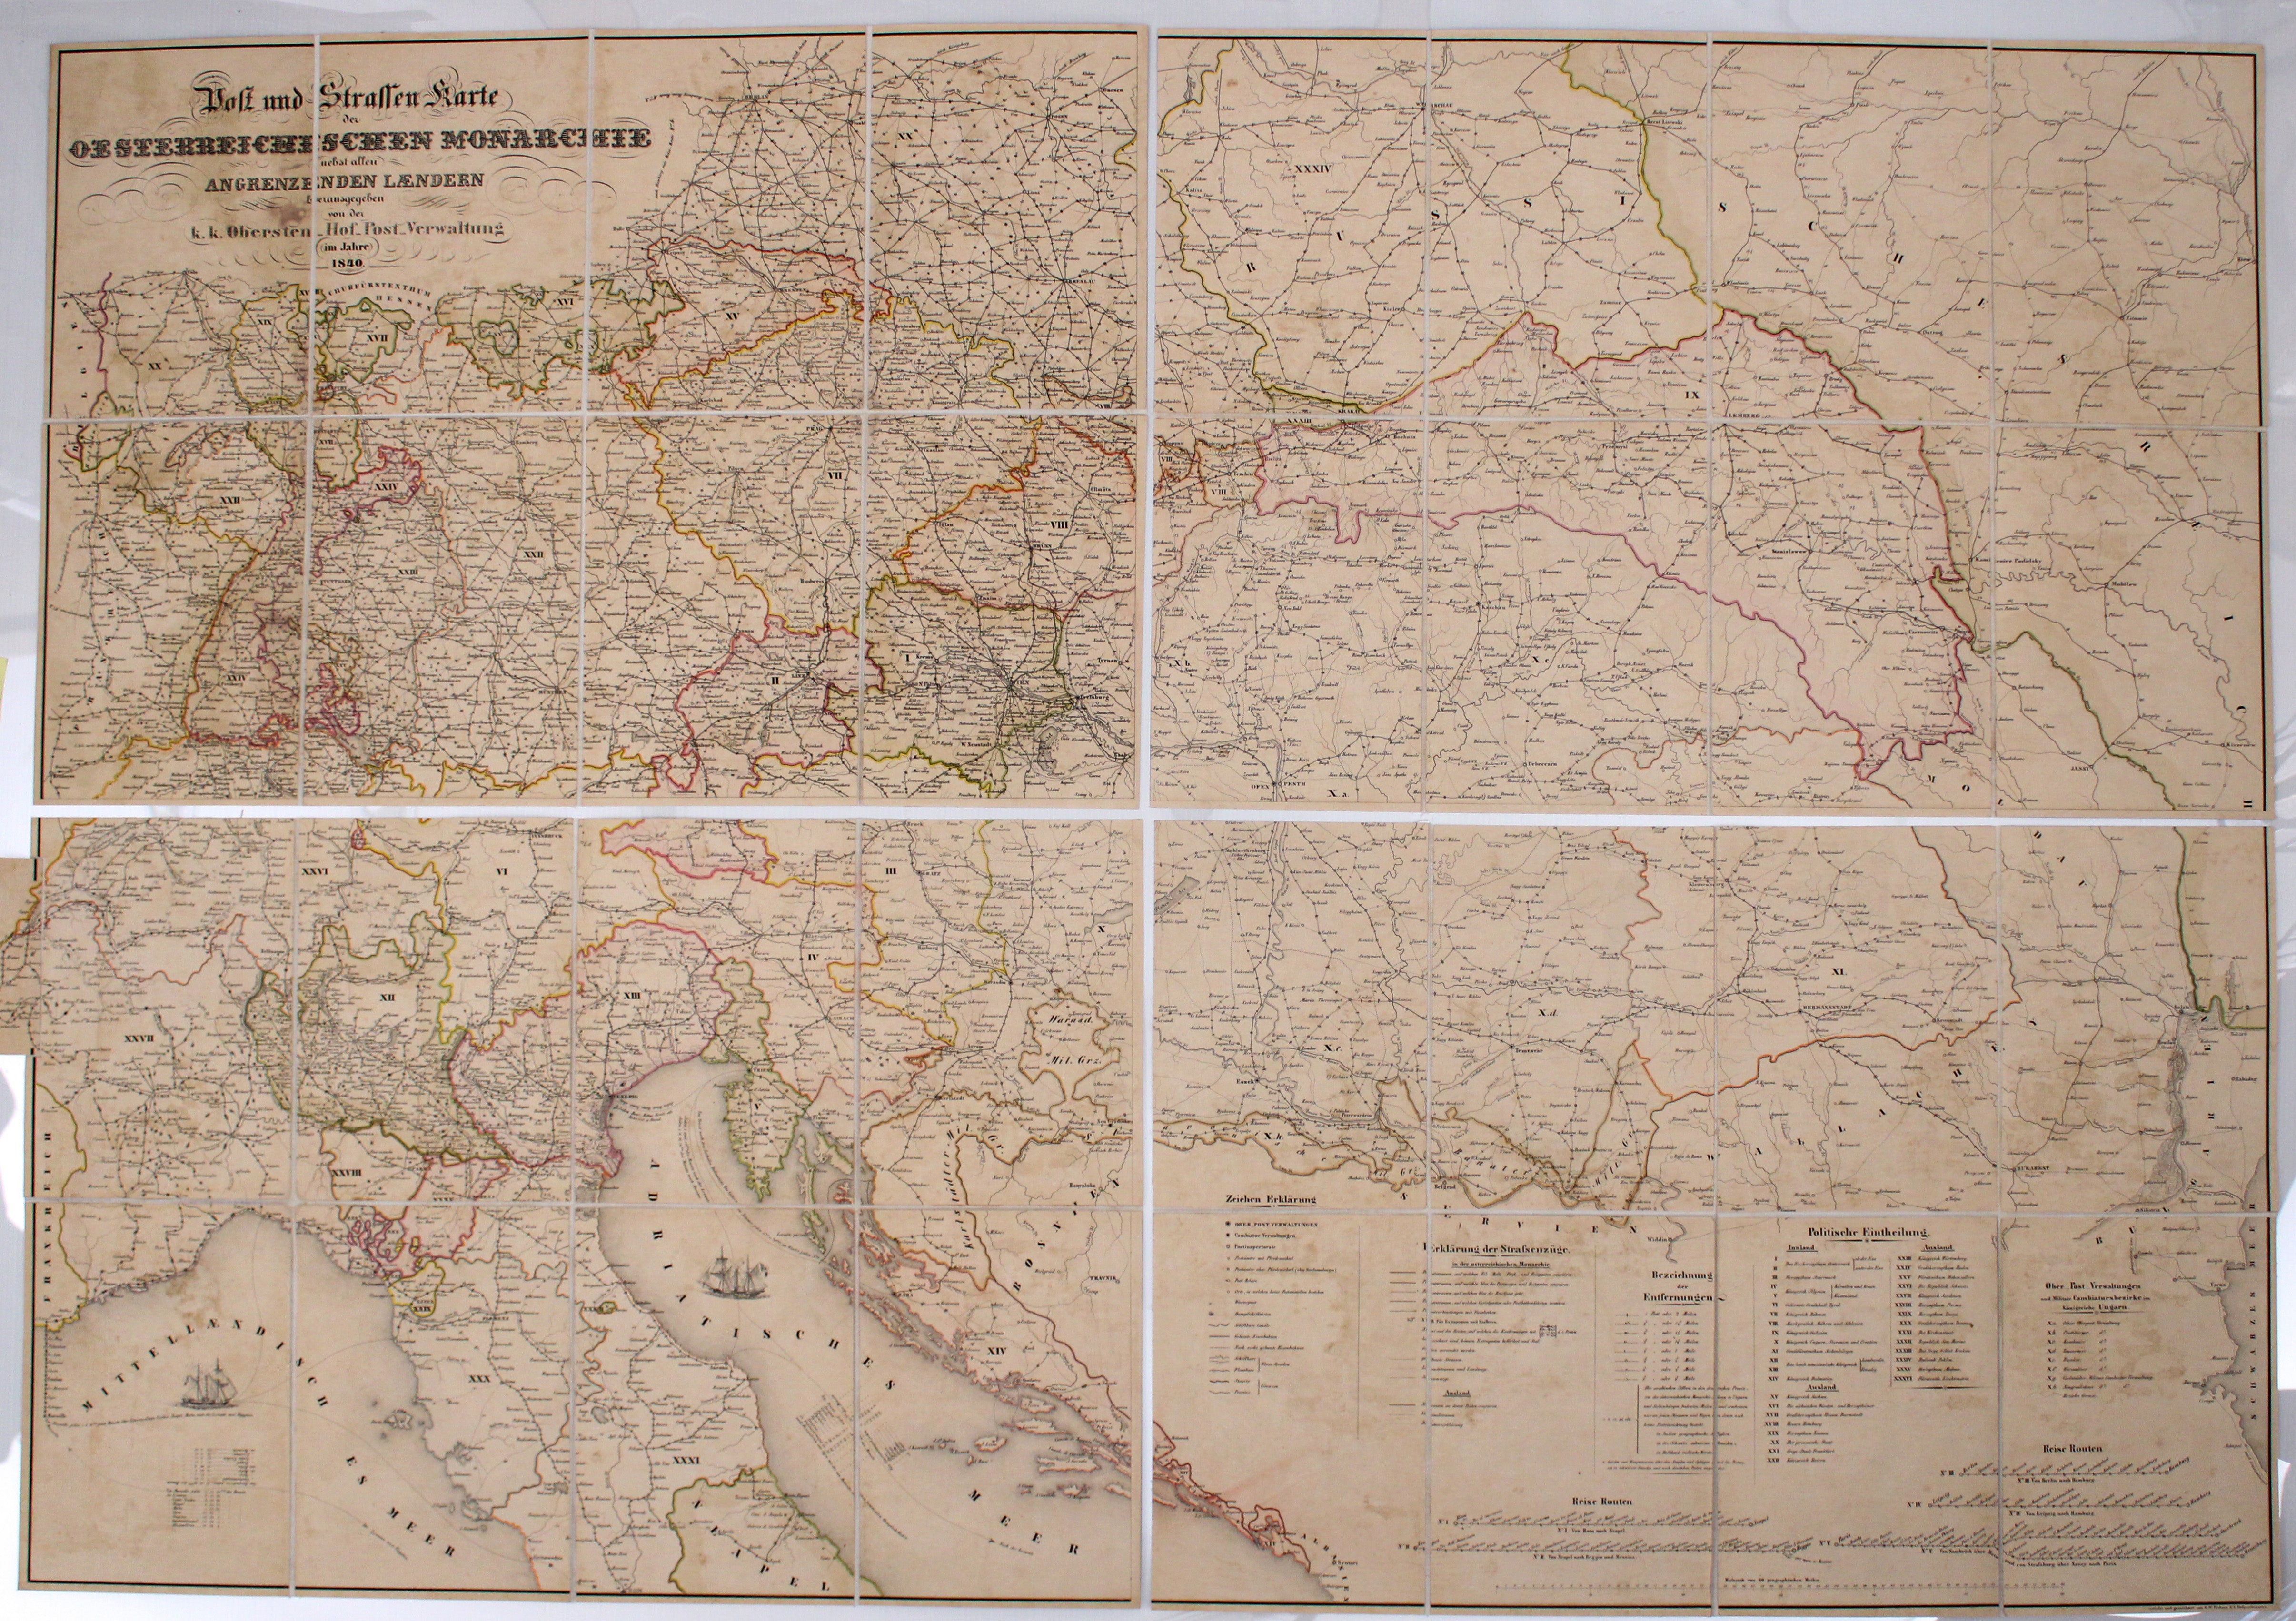 Post Roads of the Austro-Hungarian Empire